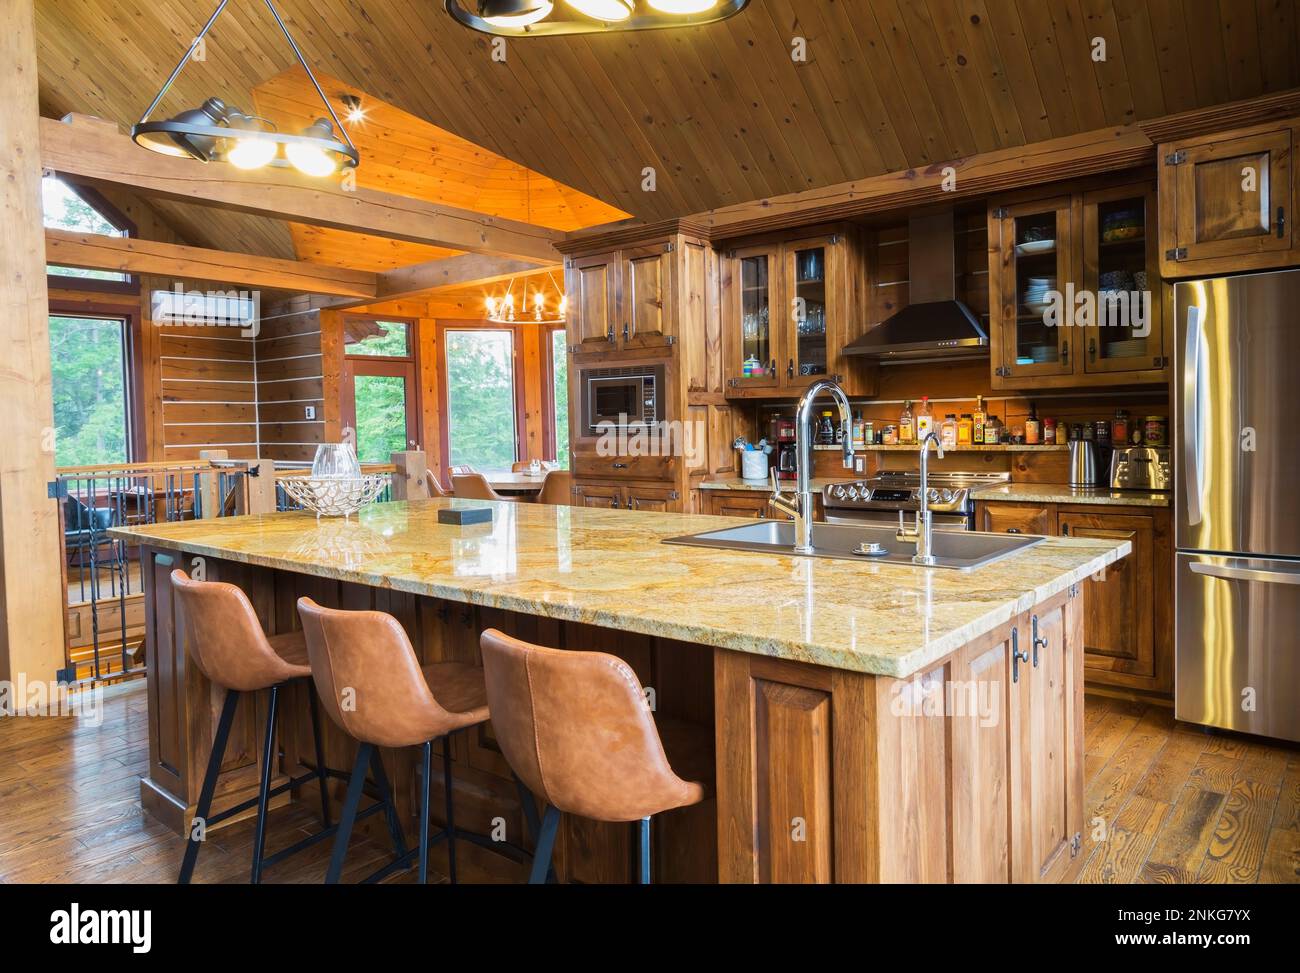 Pine wood cabinets with inlaid glass and island with yellow nuanced granite countertop and tan leather high chairs in kitchen inside milled log home. Stock Photo